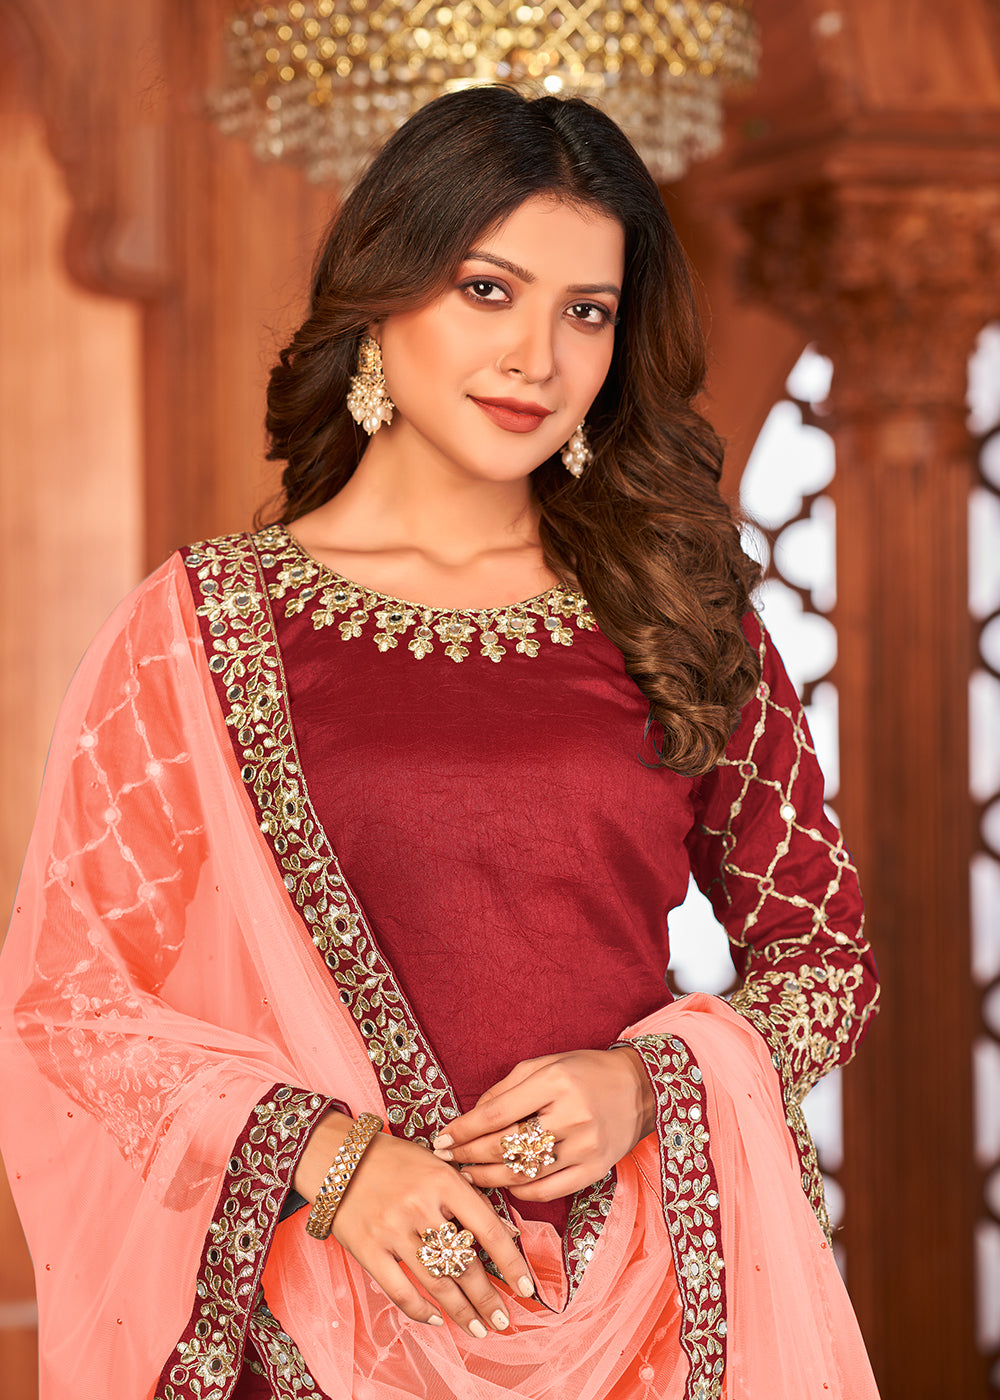 Buy Now Hot Red Glass Work Art Silk Patiala Salwar Suit Online in USA, UK, Canada & Worldwide at Empress Clothing.